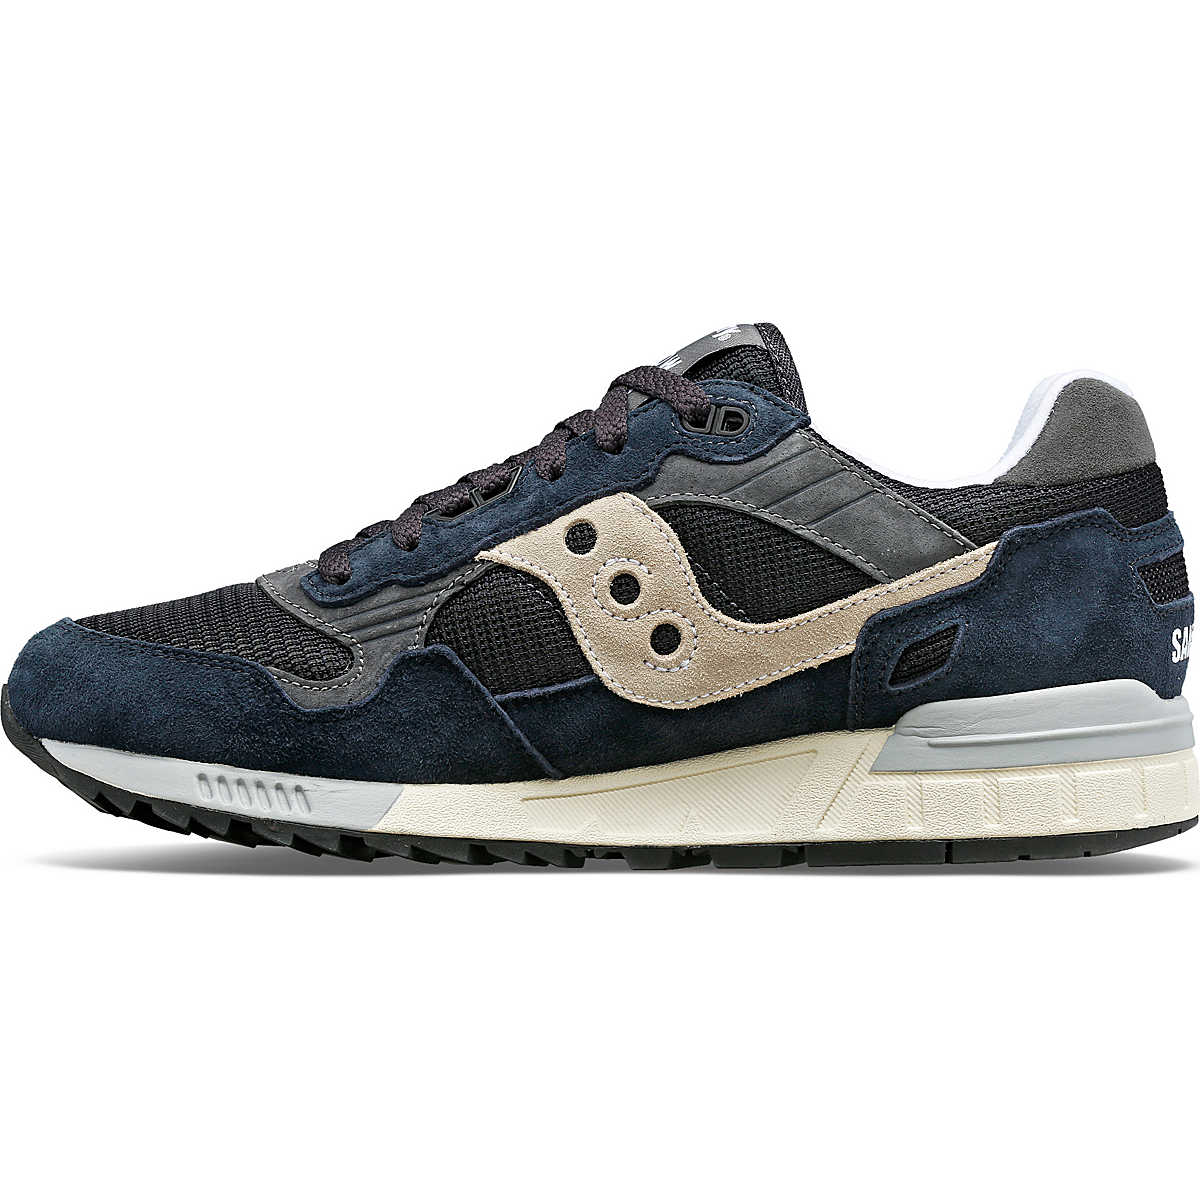 Saucony Mens Shadow 5000 Trainers - Navy / Grey